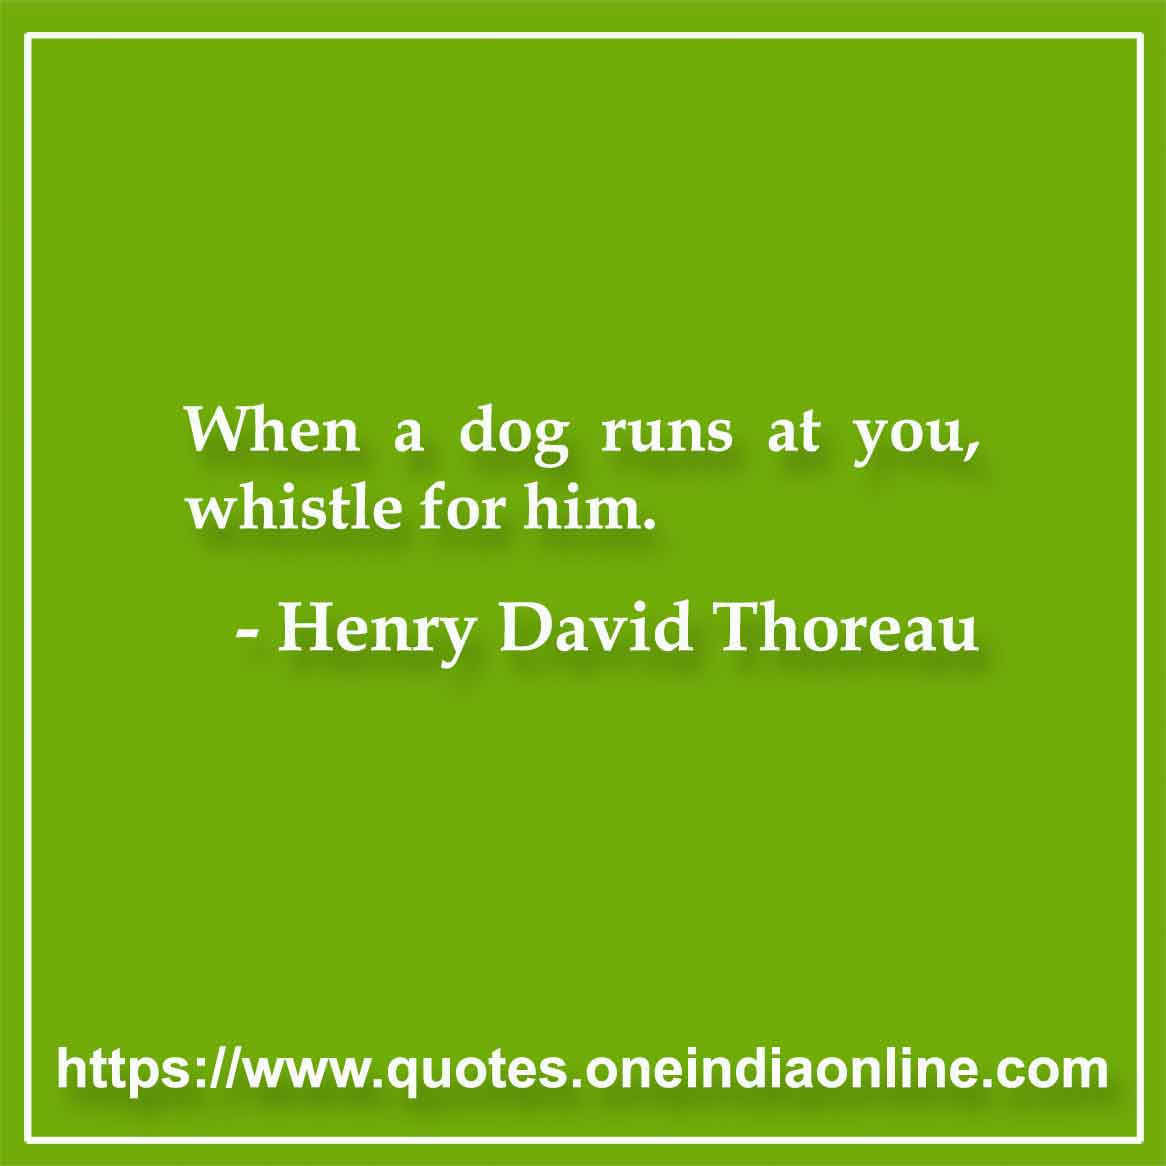 When a dog runs at you, whistle for him.

- Henry David Thoreau Quotes